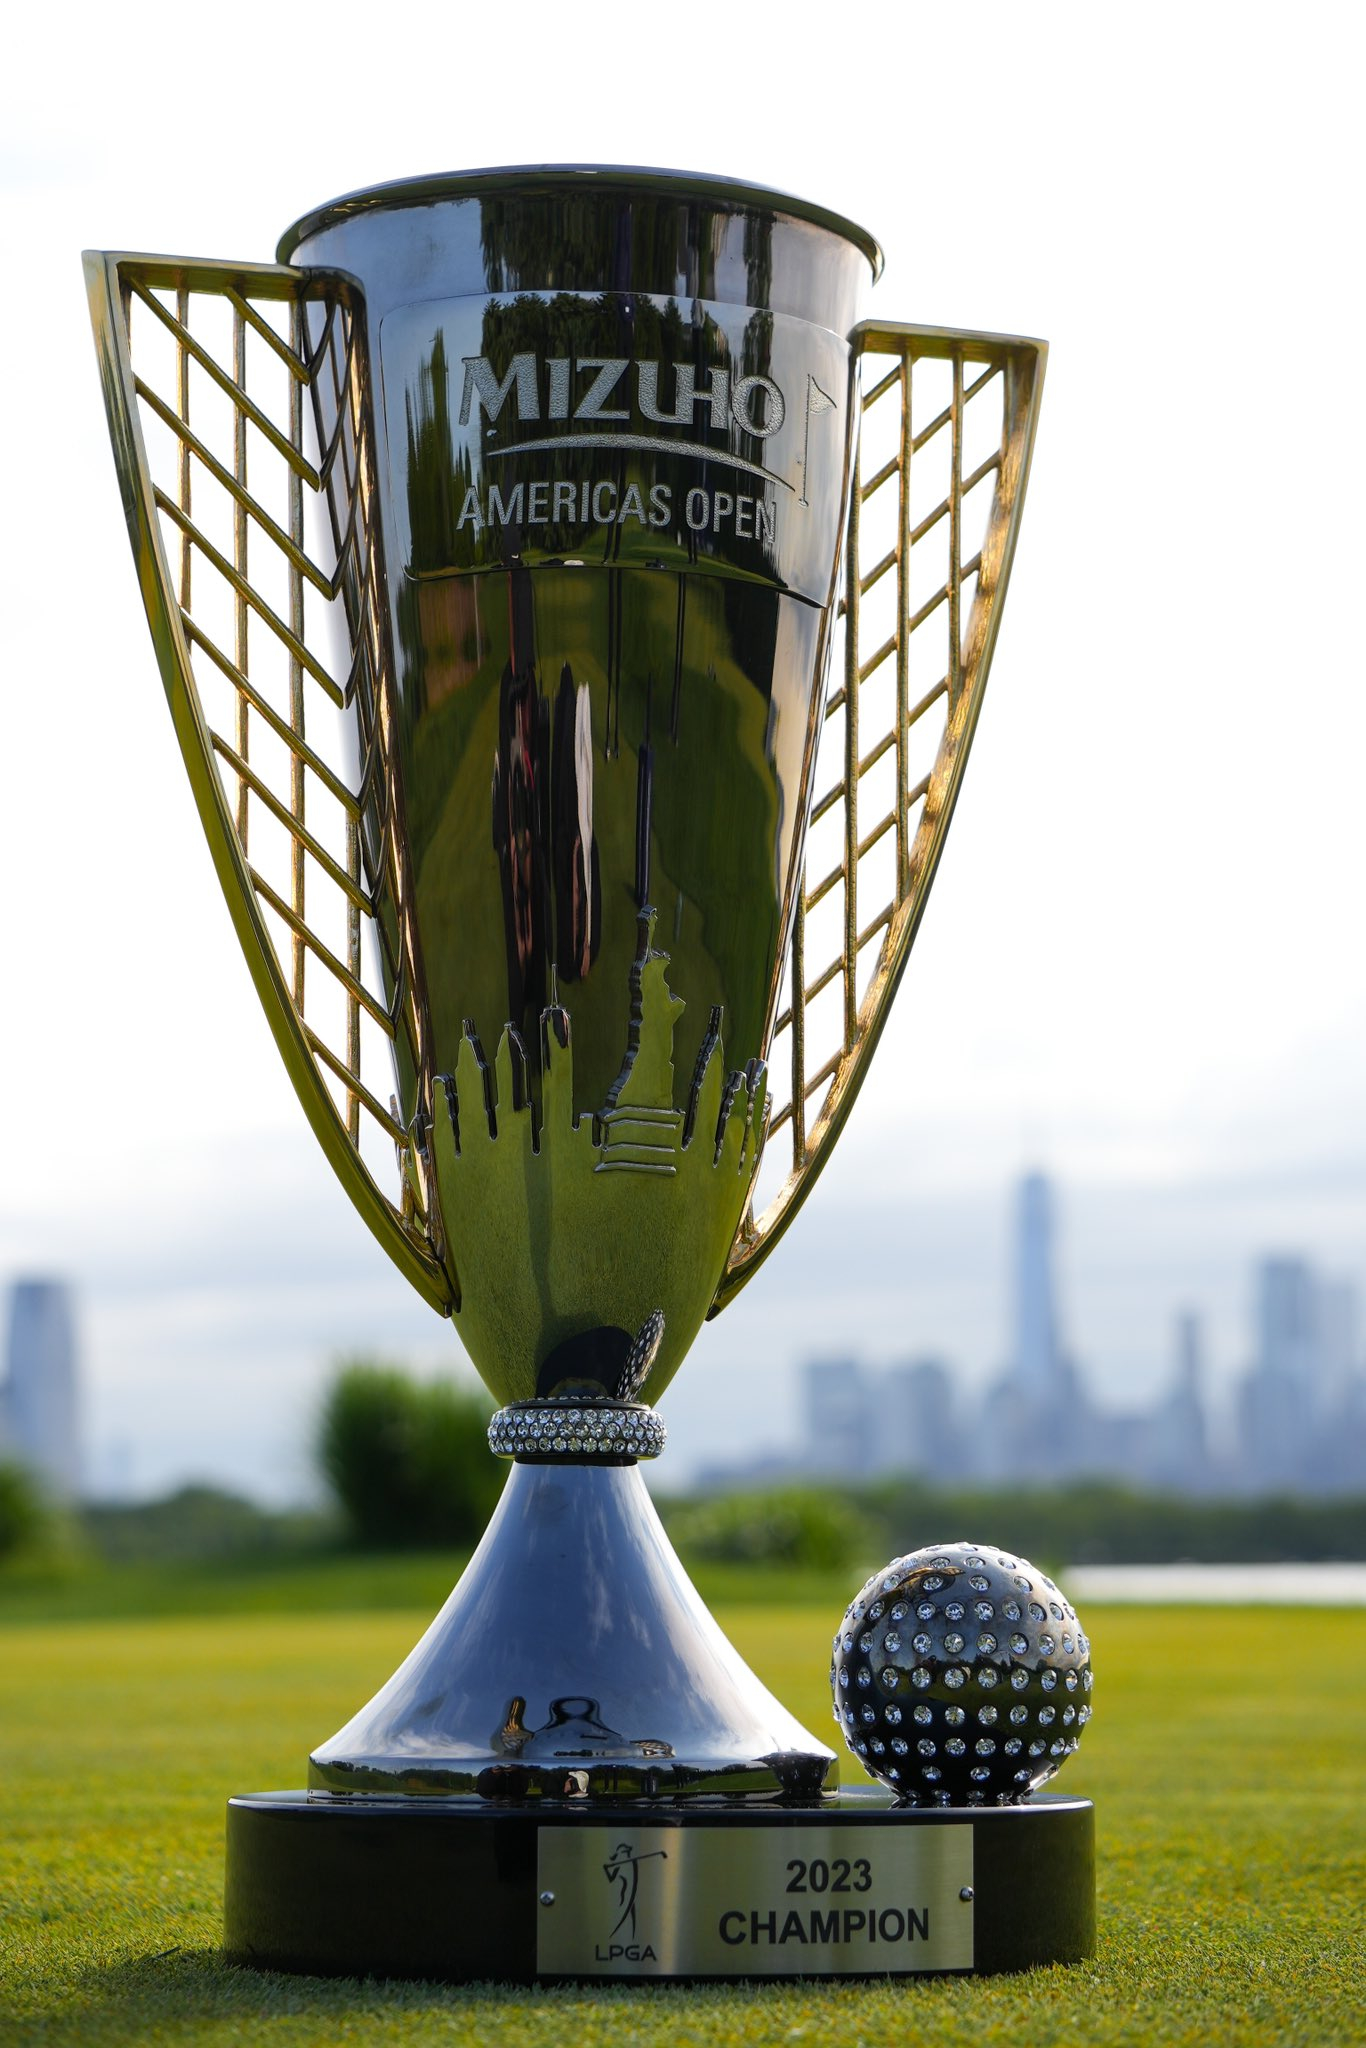 Mizuho Americas Open Trophy made by Malcolm DeMille